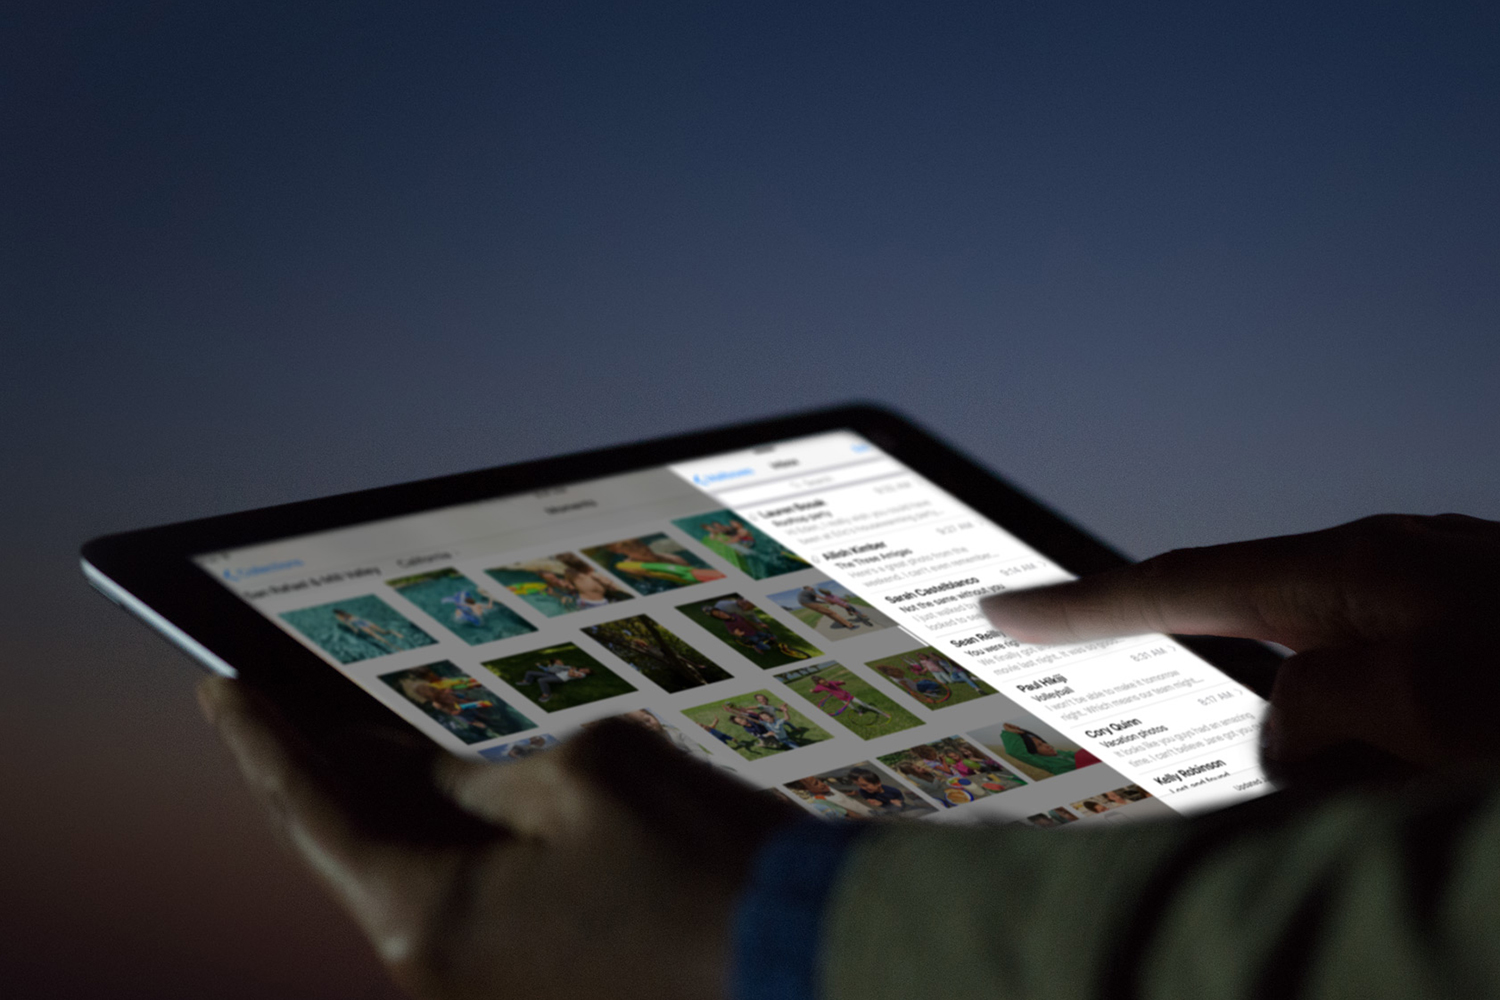 apple march event ios 9 3 packs some cool updates